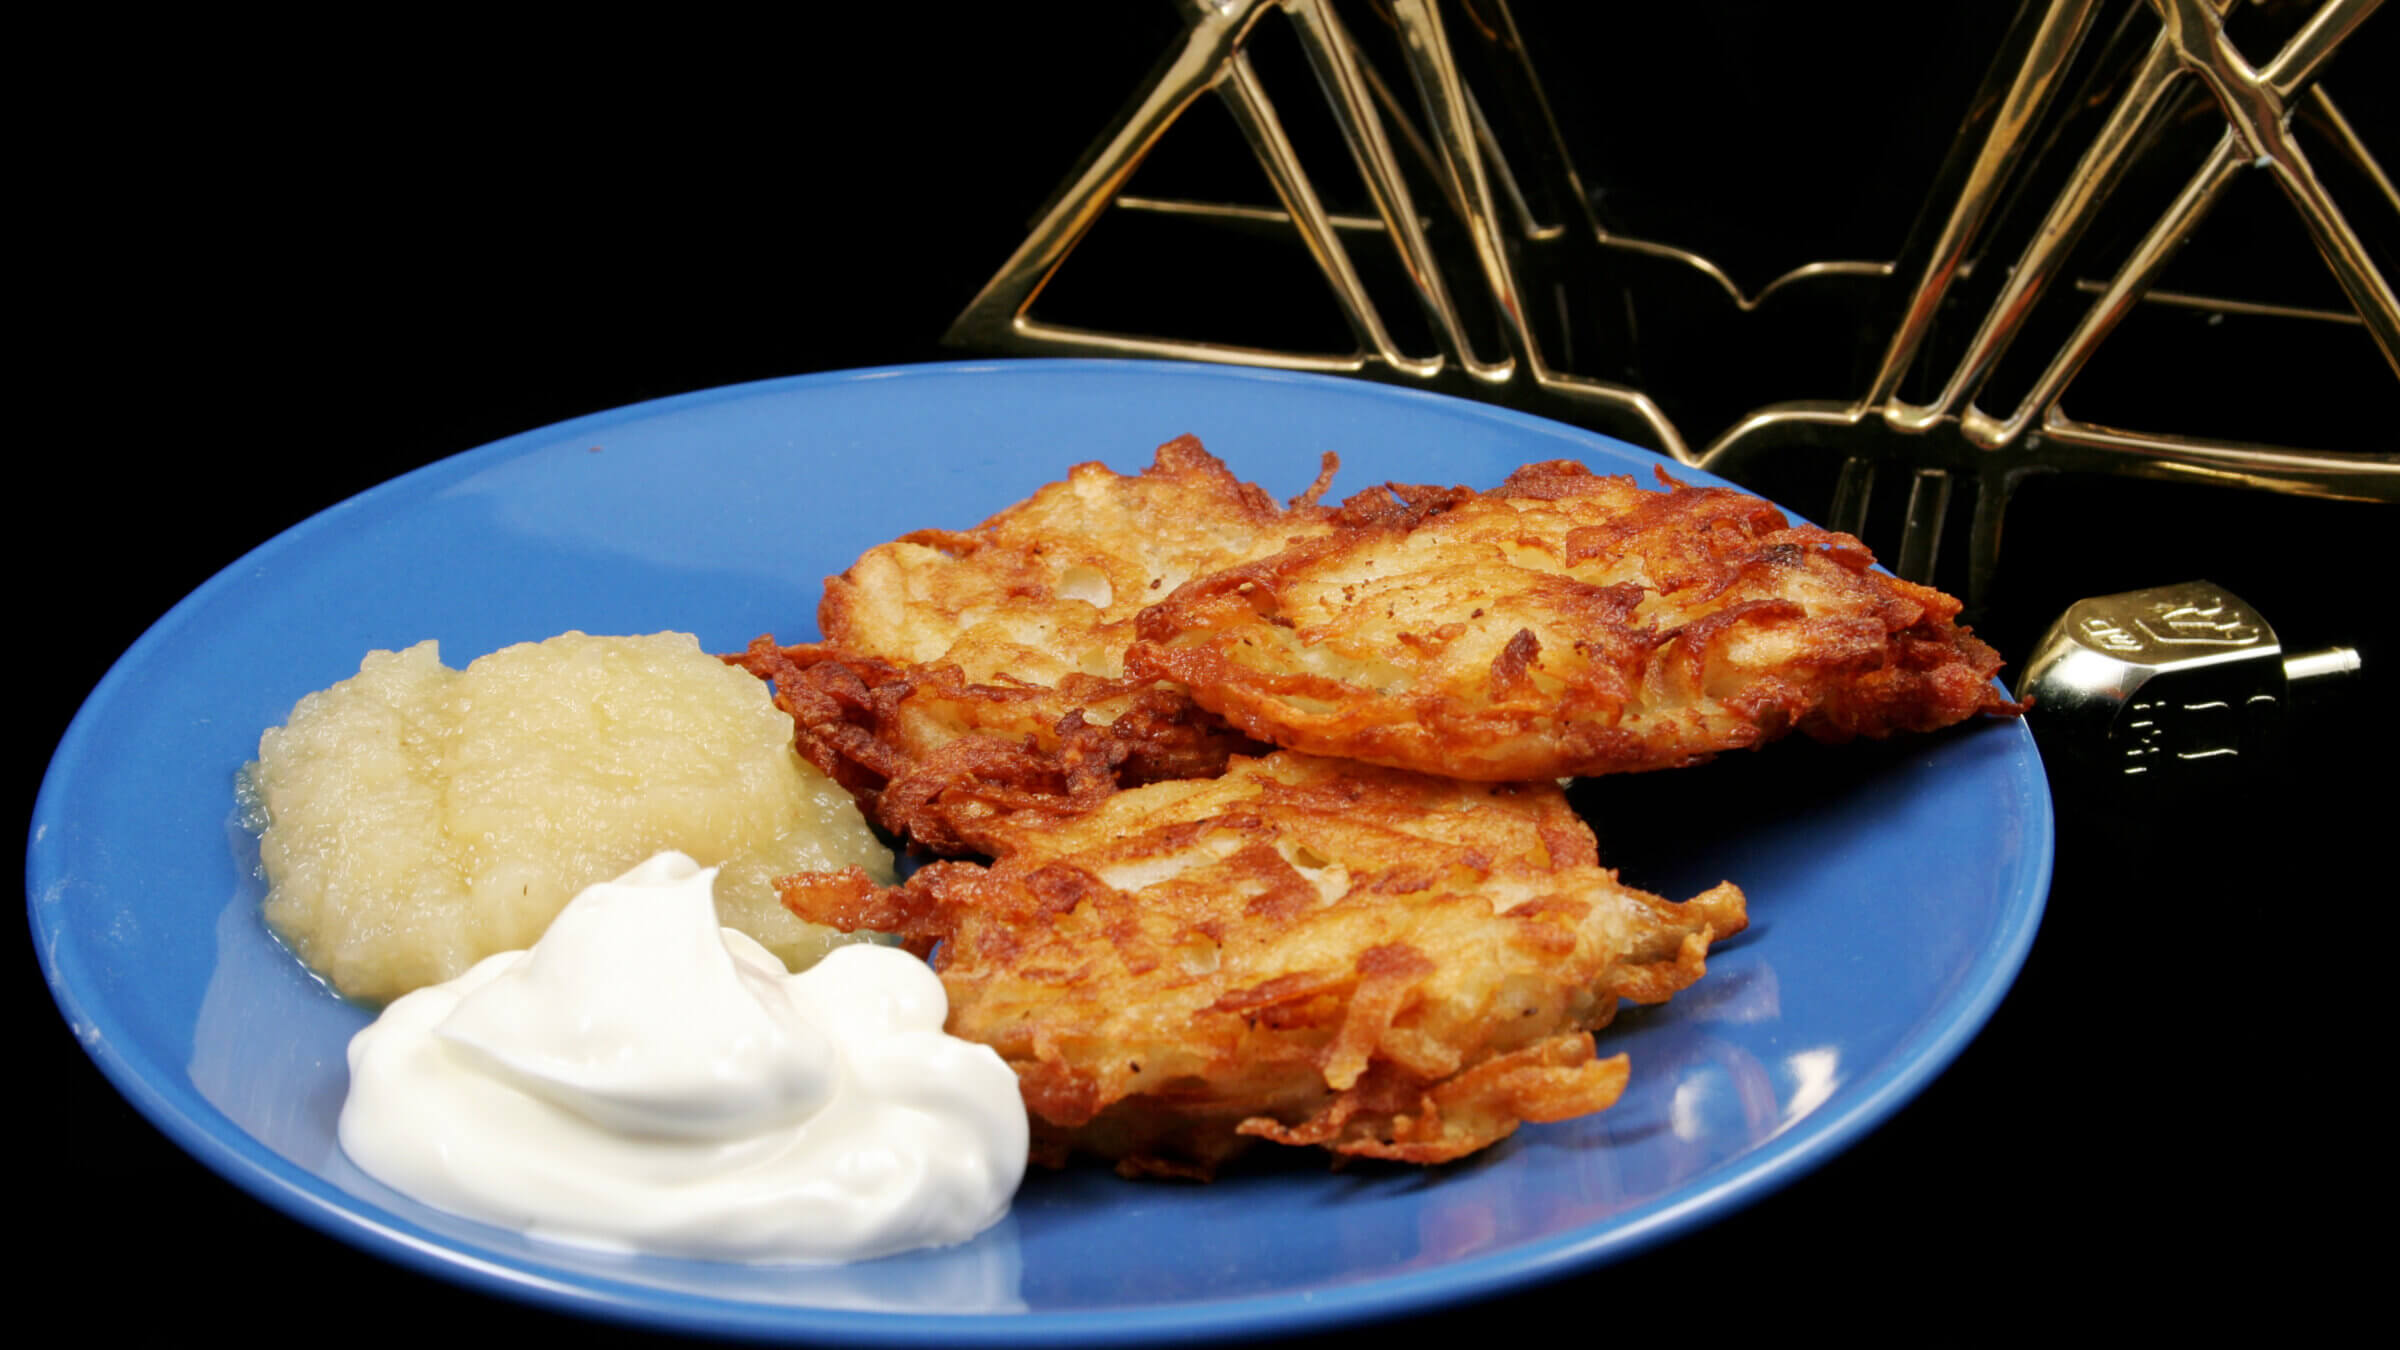 Potato latkes for Hanukkah, with applesauce and sour cream on the side.